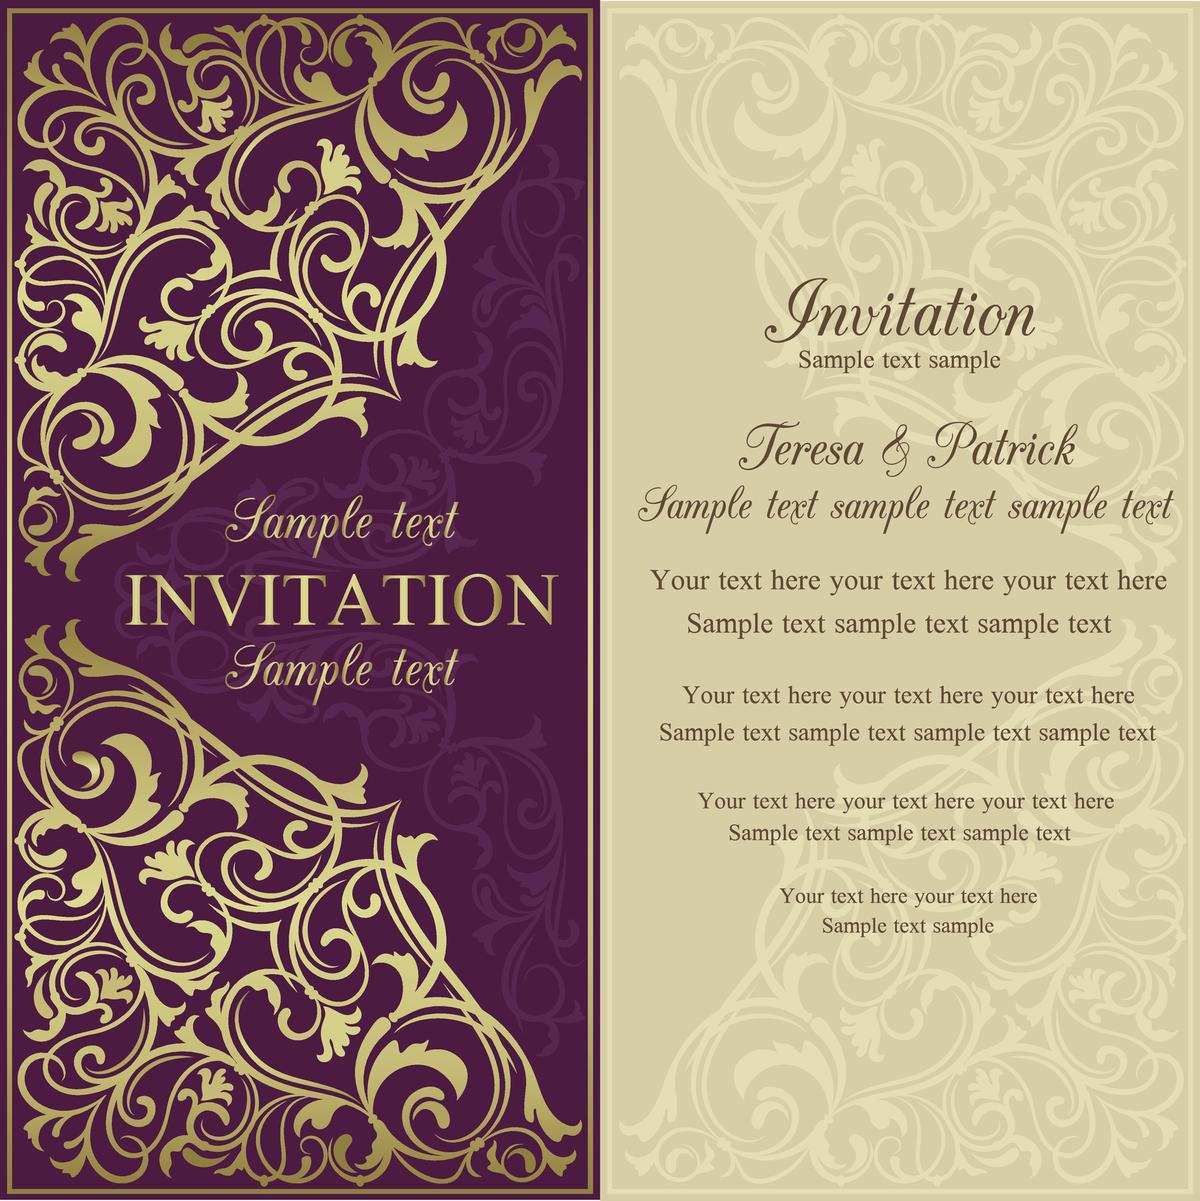 25 Visiting The Example Of Invitation Card Templates by The With Regard To Sample Wedding Invitation Cards Templates